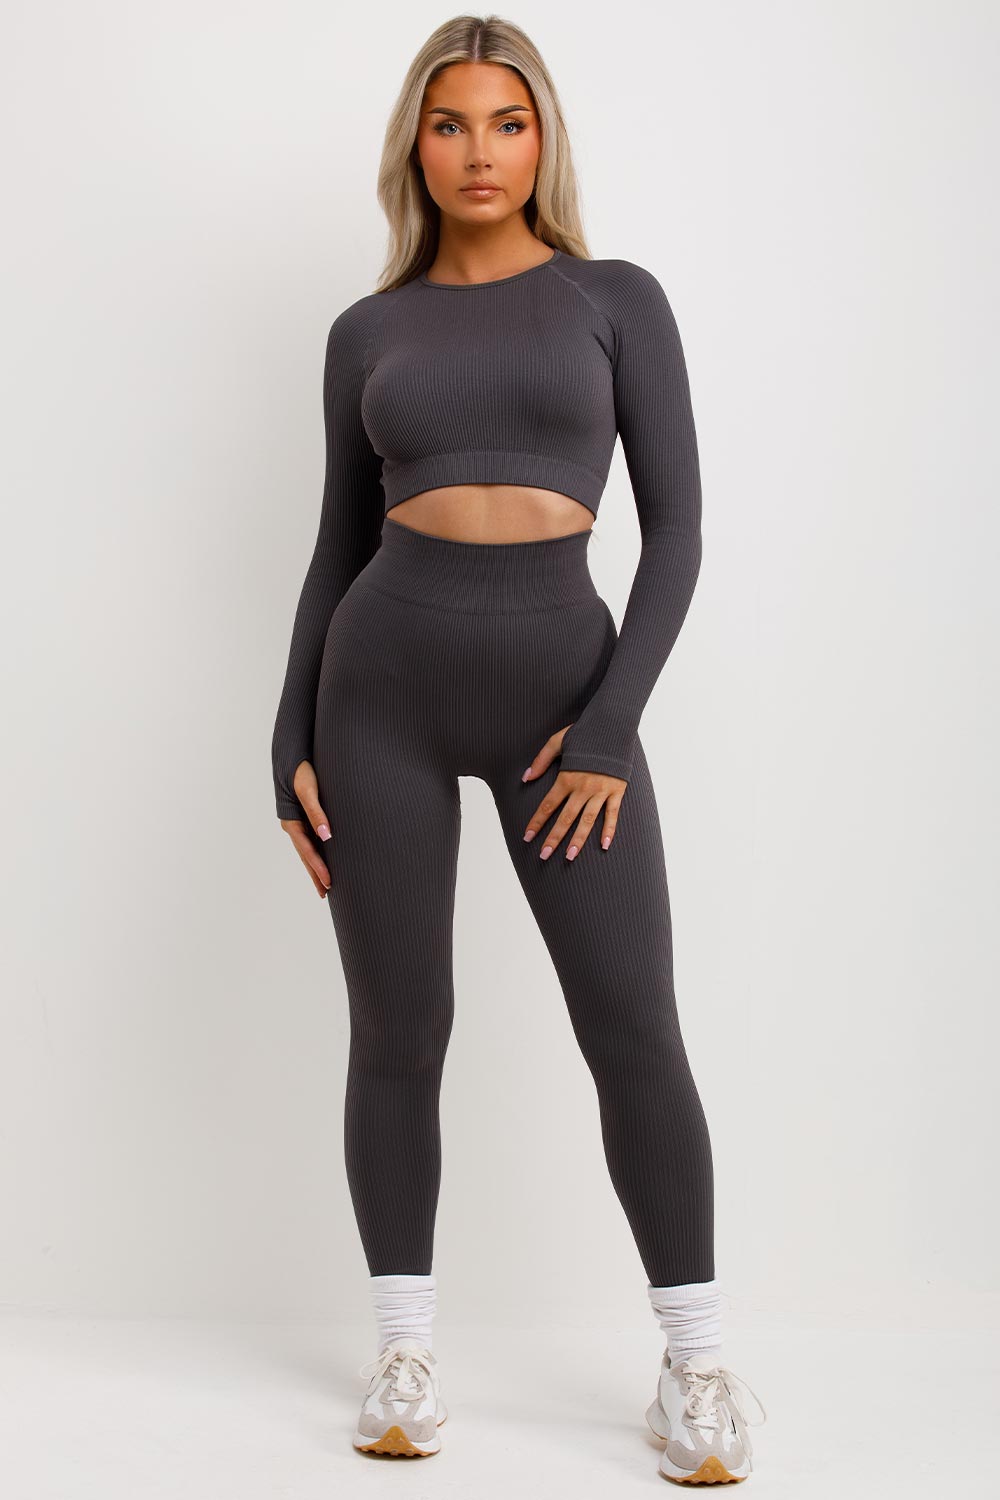 womens rib leggings and top two piece set